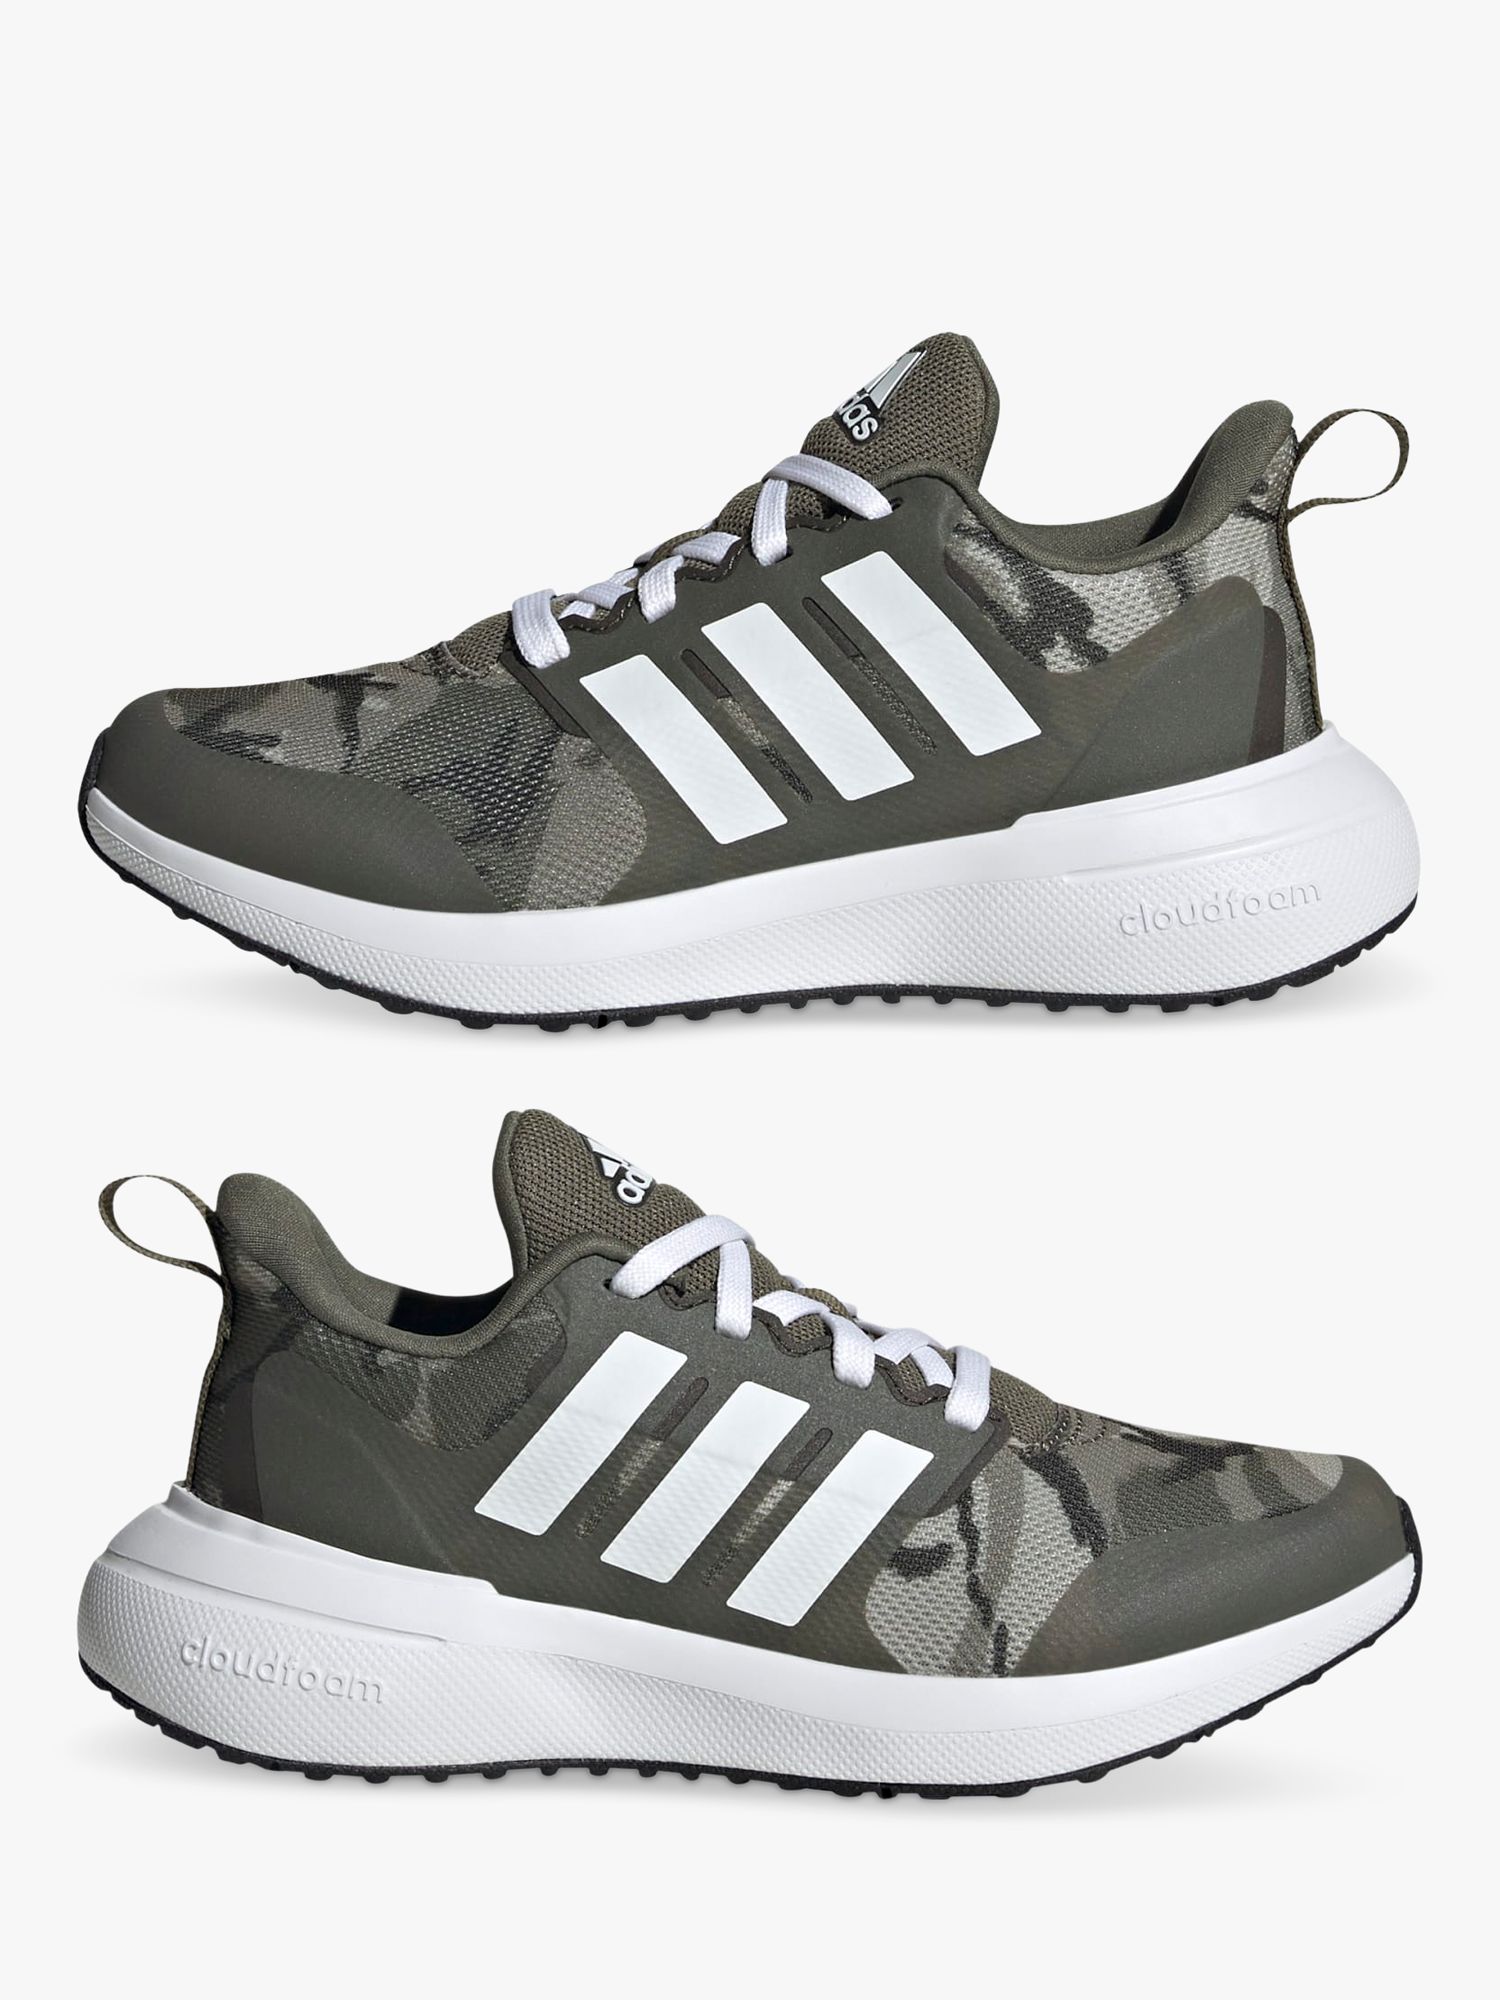 adidas Kids' Fortarun 2.0 Lace Up Camouflage Trainers, Olive/White, 5